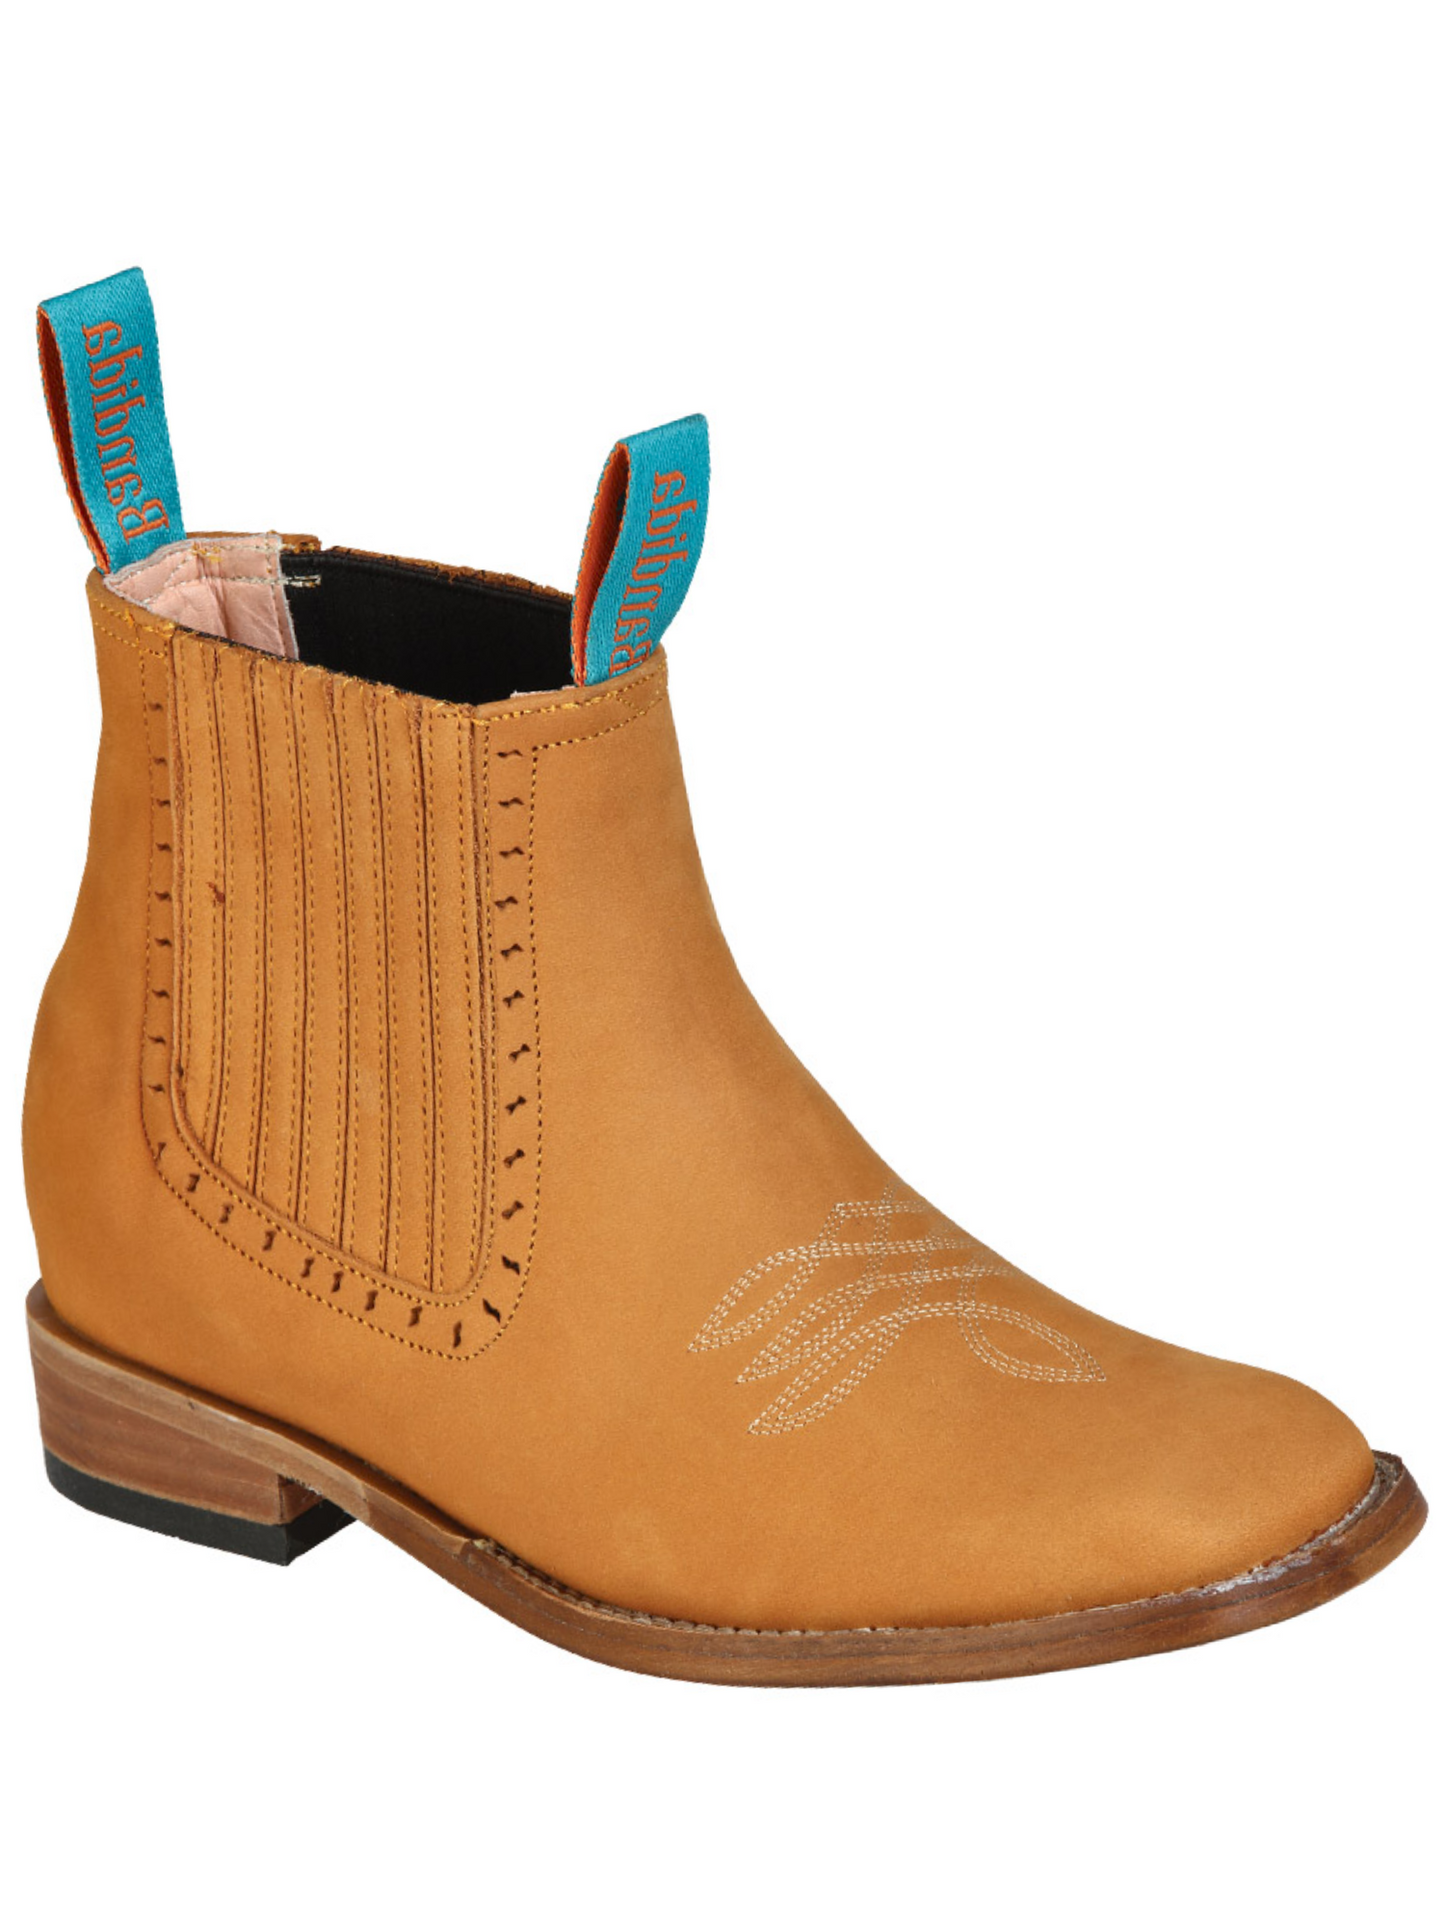 Classic Nubuck Leather Rodeo Cowboy Ankle Boots for Women 'La Barca' - ID: 126664 Western Ankle Boots La Barca